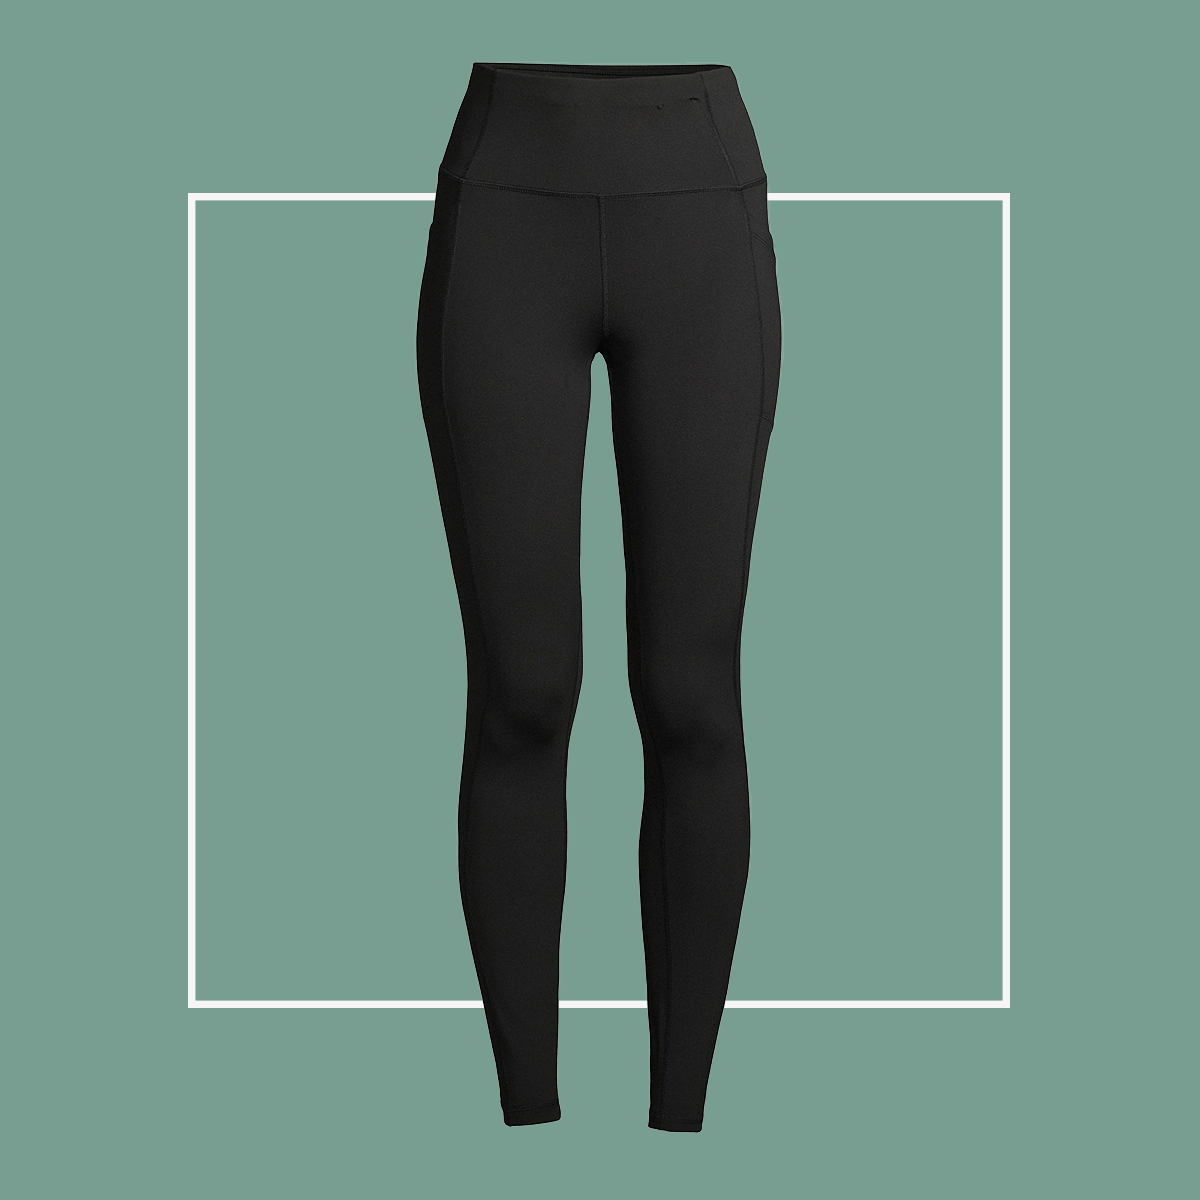 Routine Legging in Navy Nimbus Fabric with 4-Way Stretch – Wear One's At